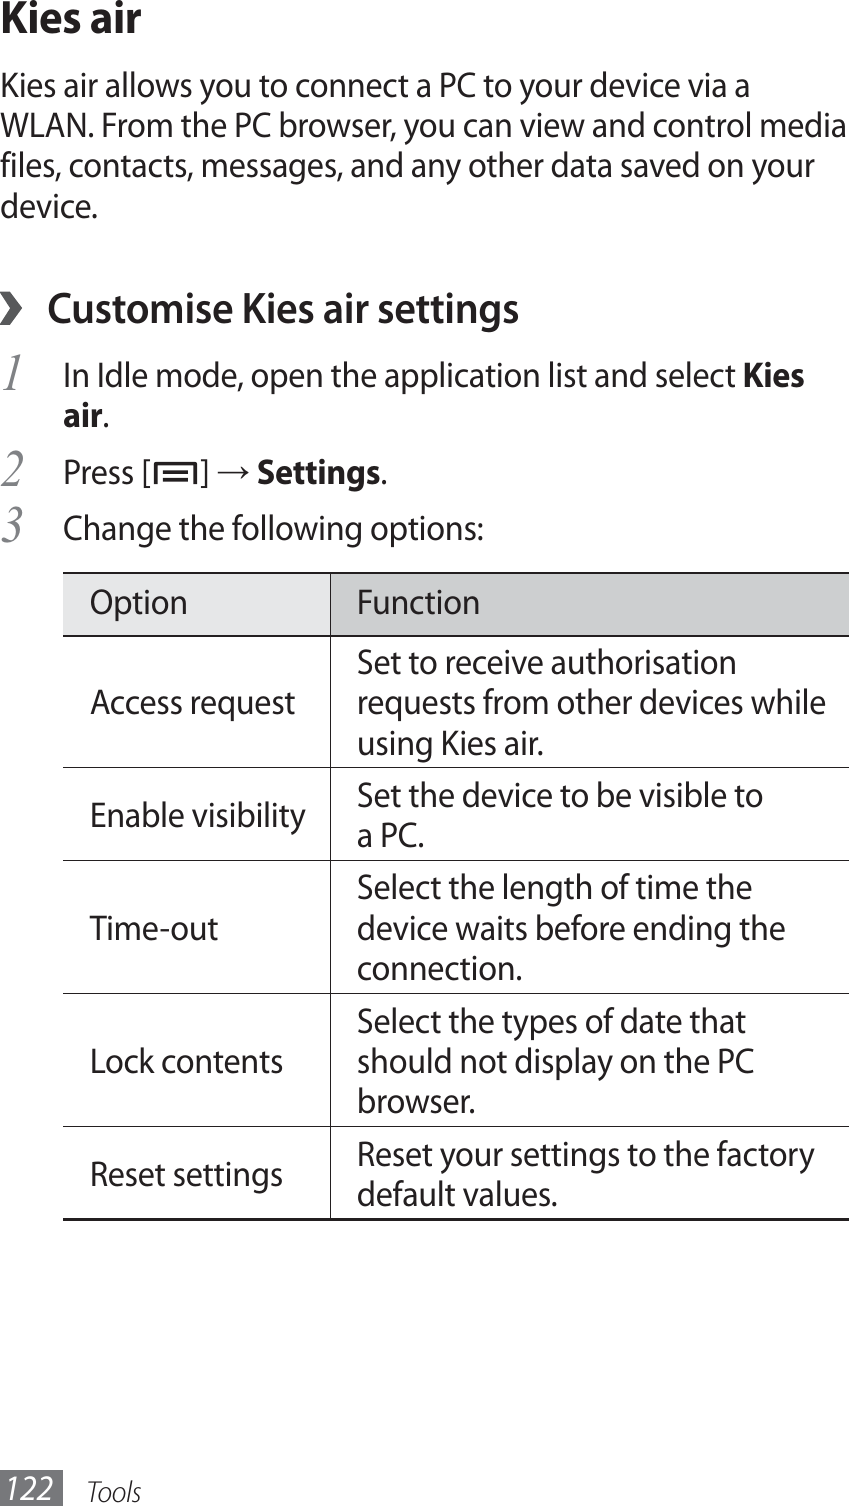 Tools122Kies airKies air allows you to connect a PC to your device via a WLAN. From the PC browser, you can view and control media files, contacts, messages, and any other data saved on your device.Customise Kies air settings ›In Idle mode, open the application list and select 1 Kies air.Press [2 ] → Settings. Change the following options:3 Option FunctionAccess requestSet to receive authorisation requests from other devices while using Kies air.Enable visibility Set the device to be visible to a PC.Time-outSelect the length of time the device waits before ending the connection.Lock contentsSelect the types of date that should not display on the PC browser. Reset settings Reset your settings to the factory default values.